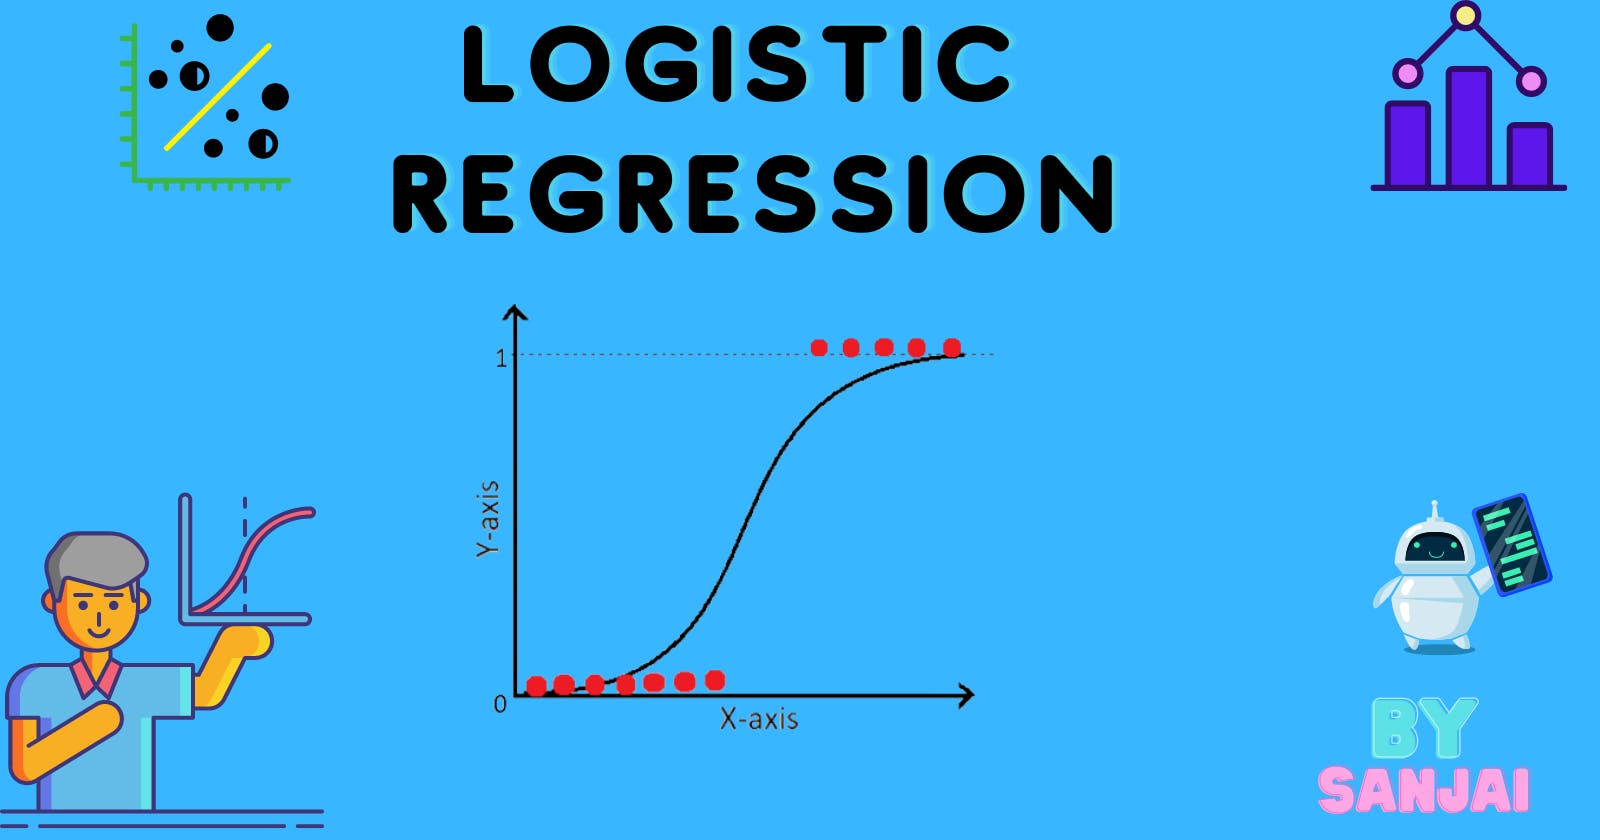 Logistic Regression  Learn from scratch and  also implement using Scikit learn  library